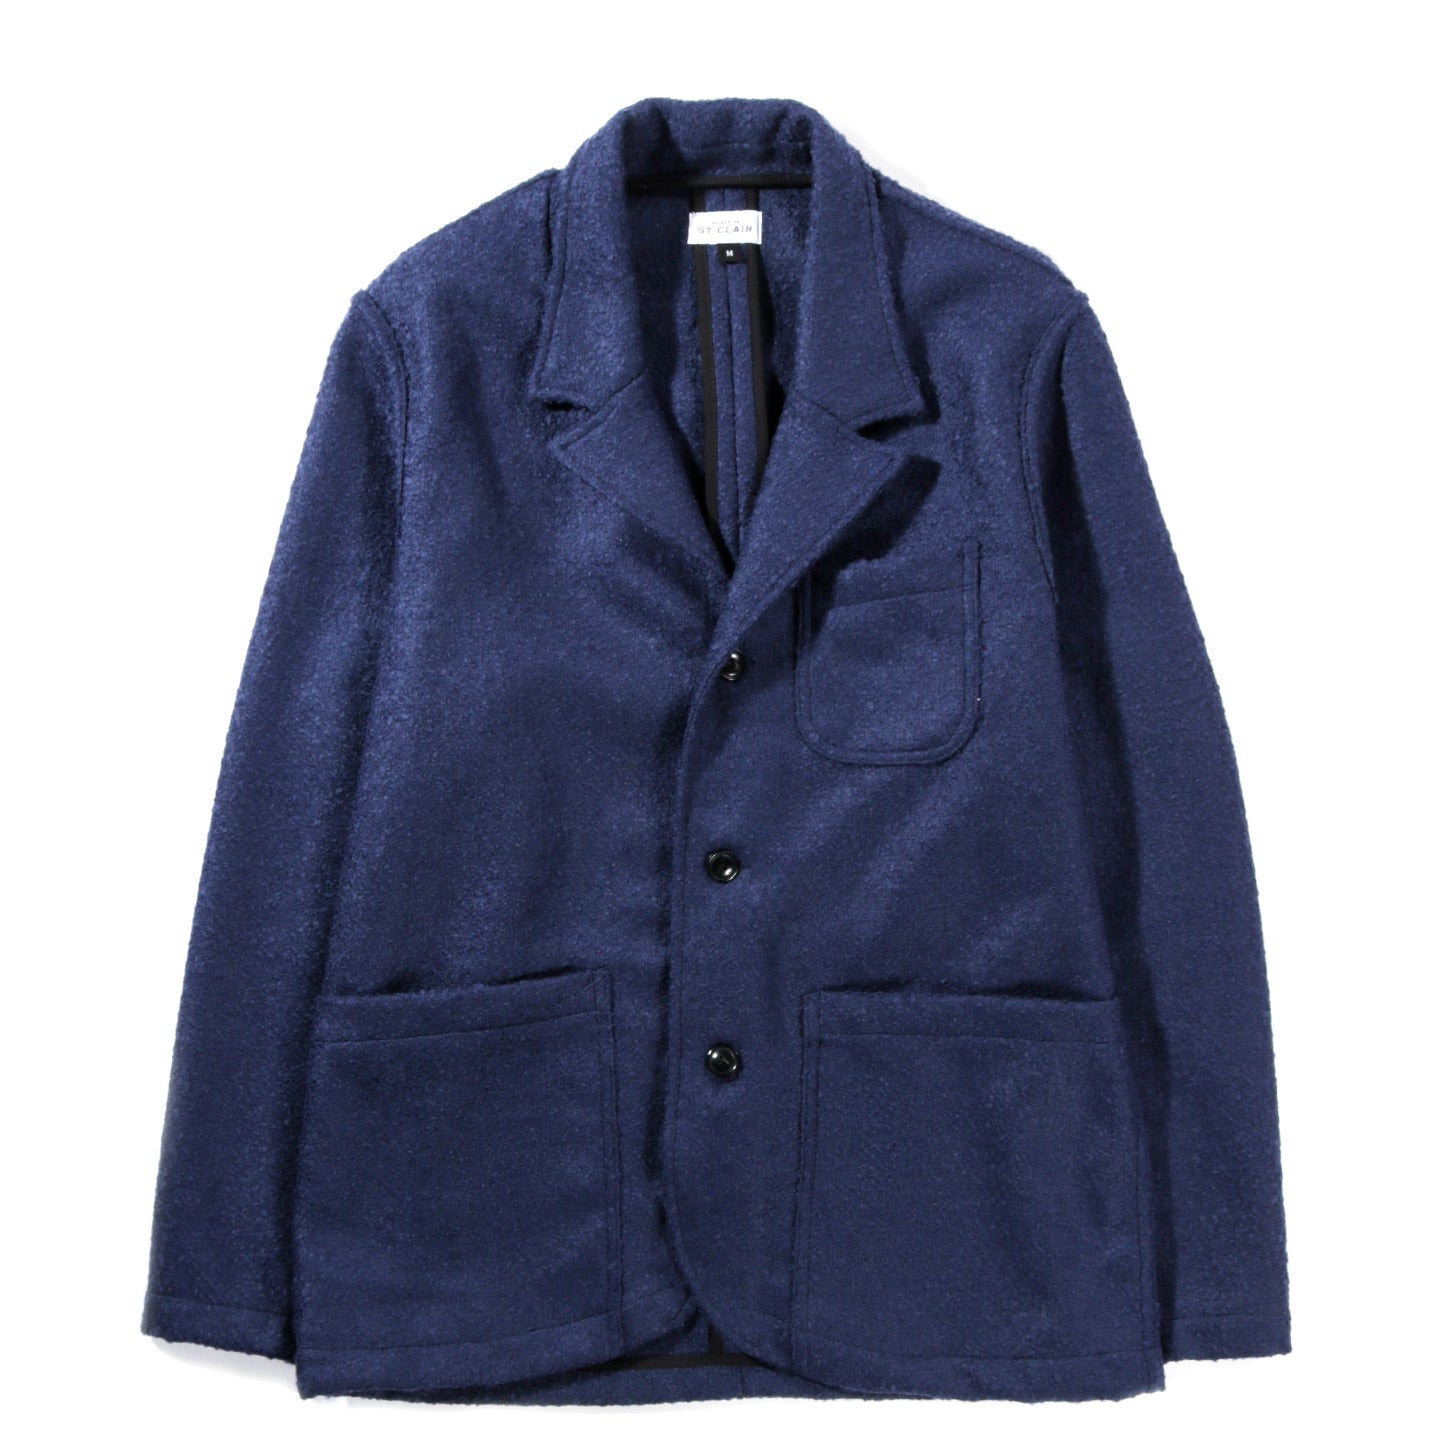 HOUSE OF ST. CLAIR CASS JACKET NAVY BOILED WOOL